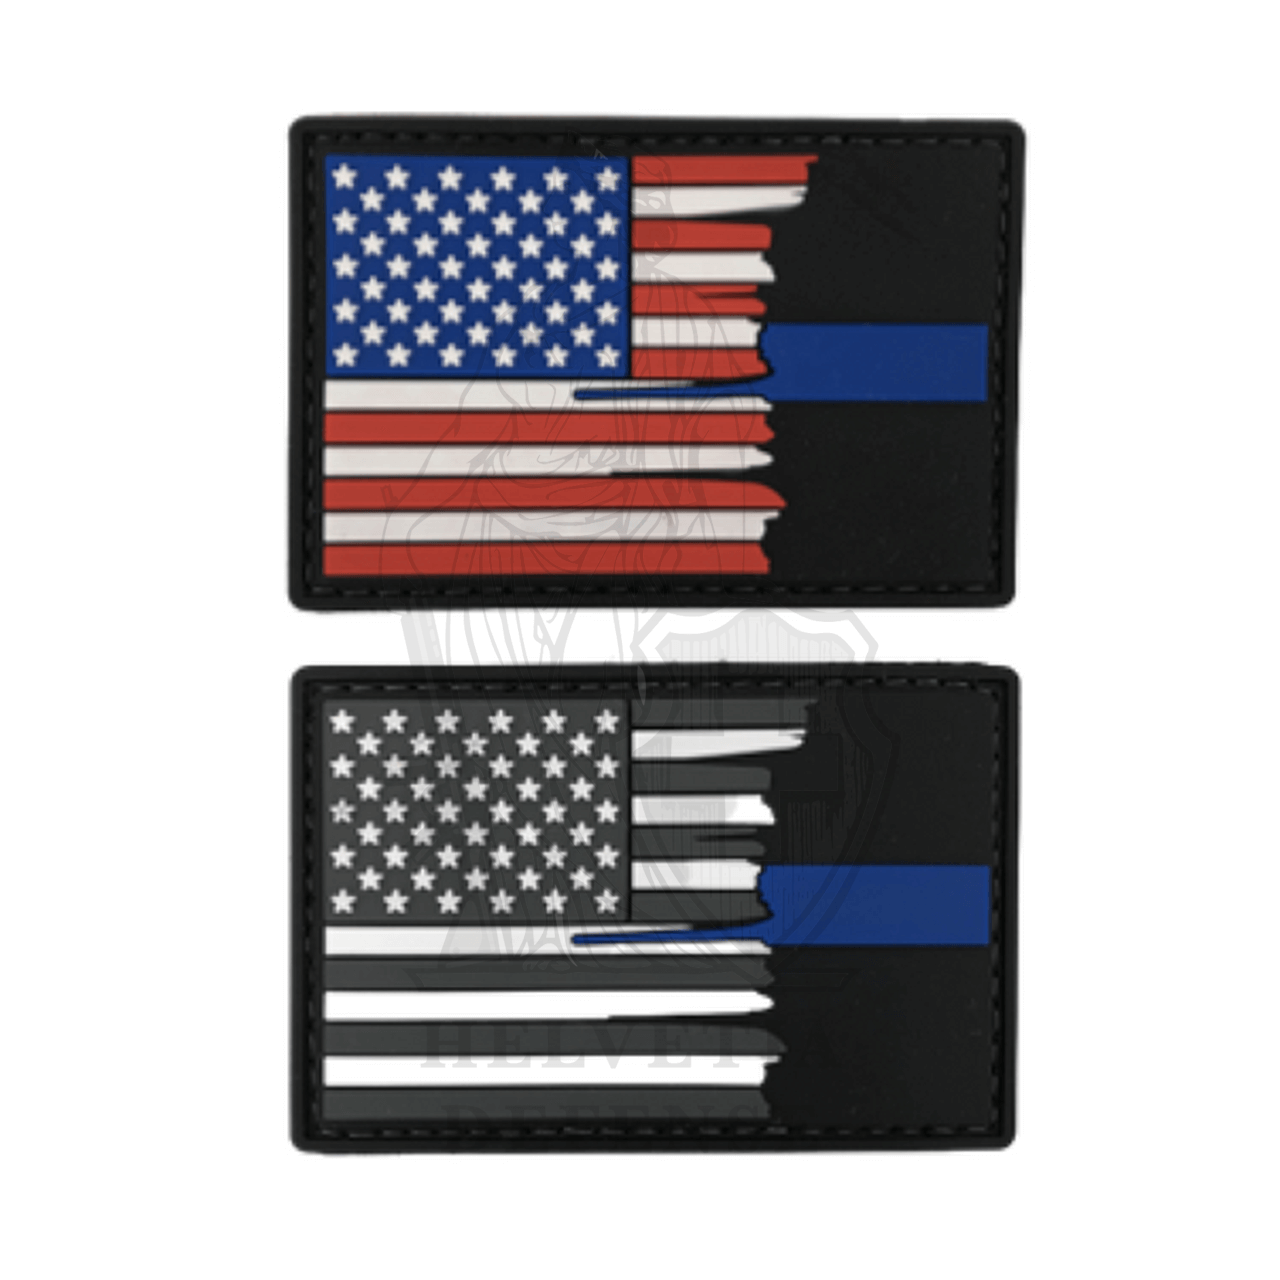 TBL USA Patch - Thin Blue Line Flag Design in Colored or Black and White  Versions - Thin Blue Line America in White Letters